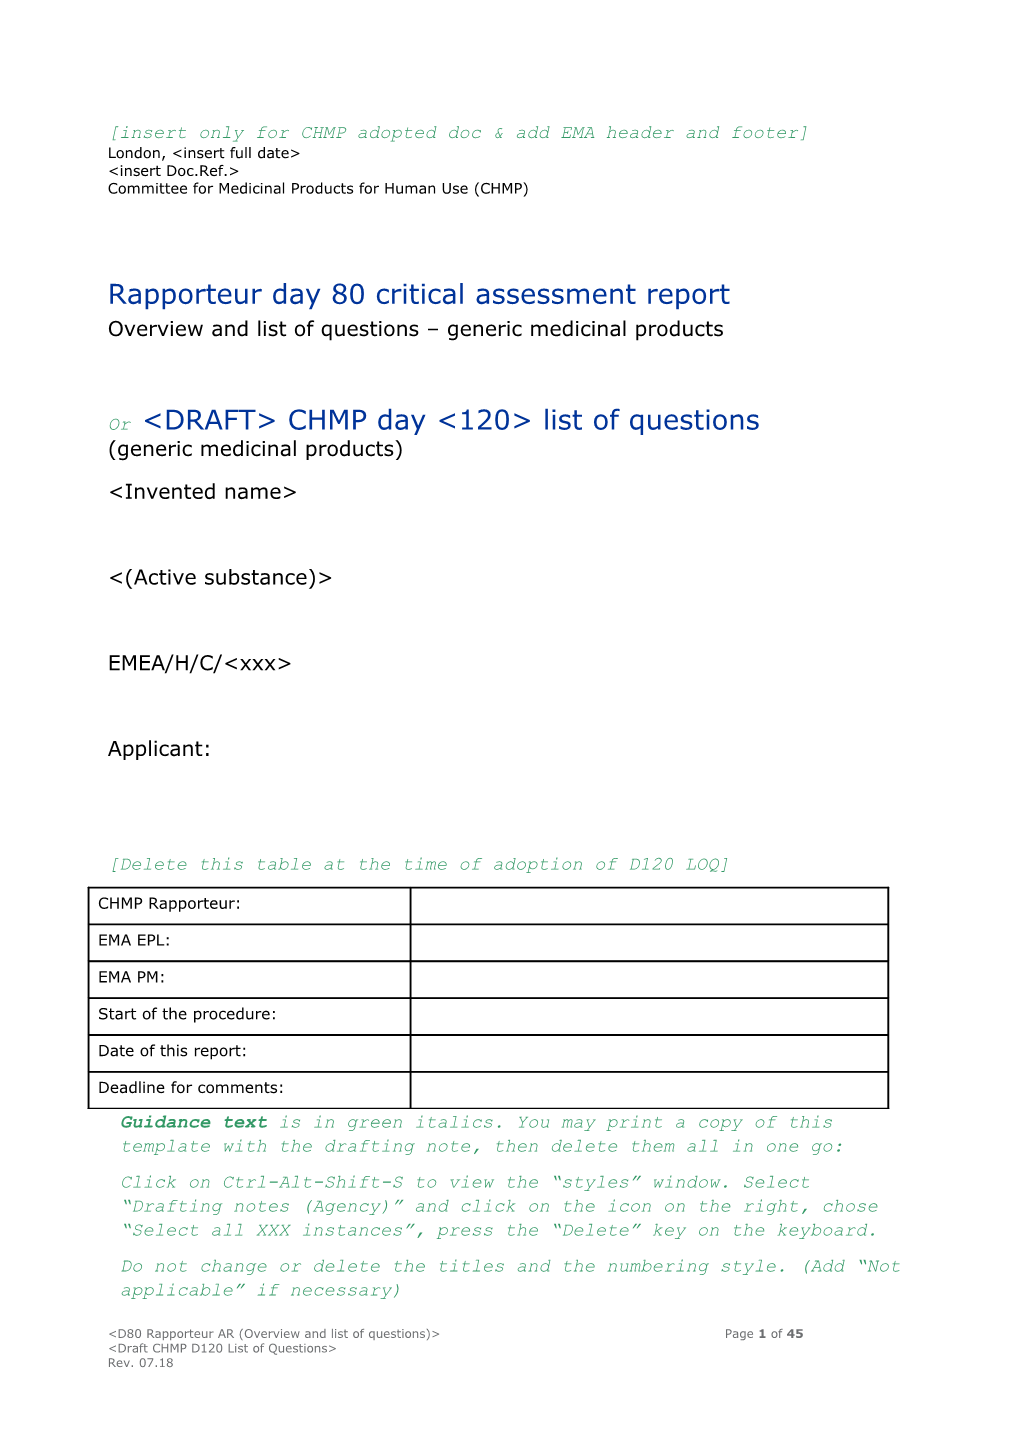 Generics - D80 Assessment Report Overview+D120 LOQ Template with Guidance Rev 07.18